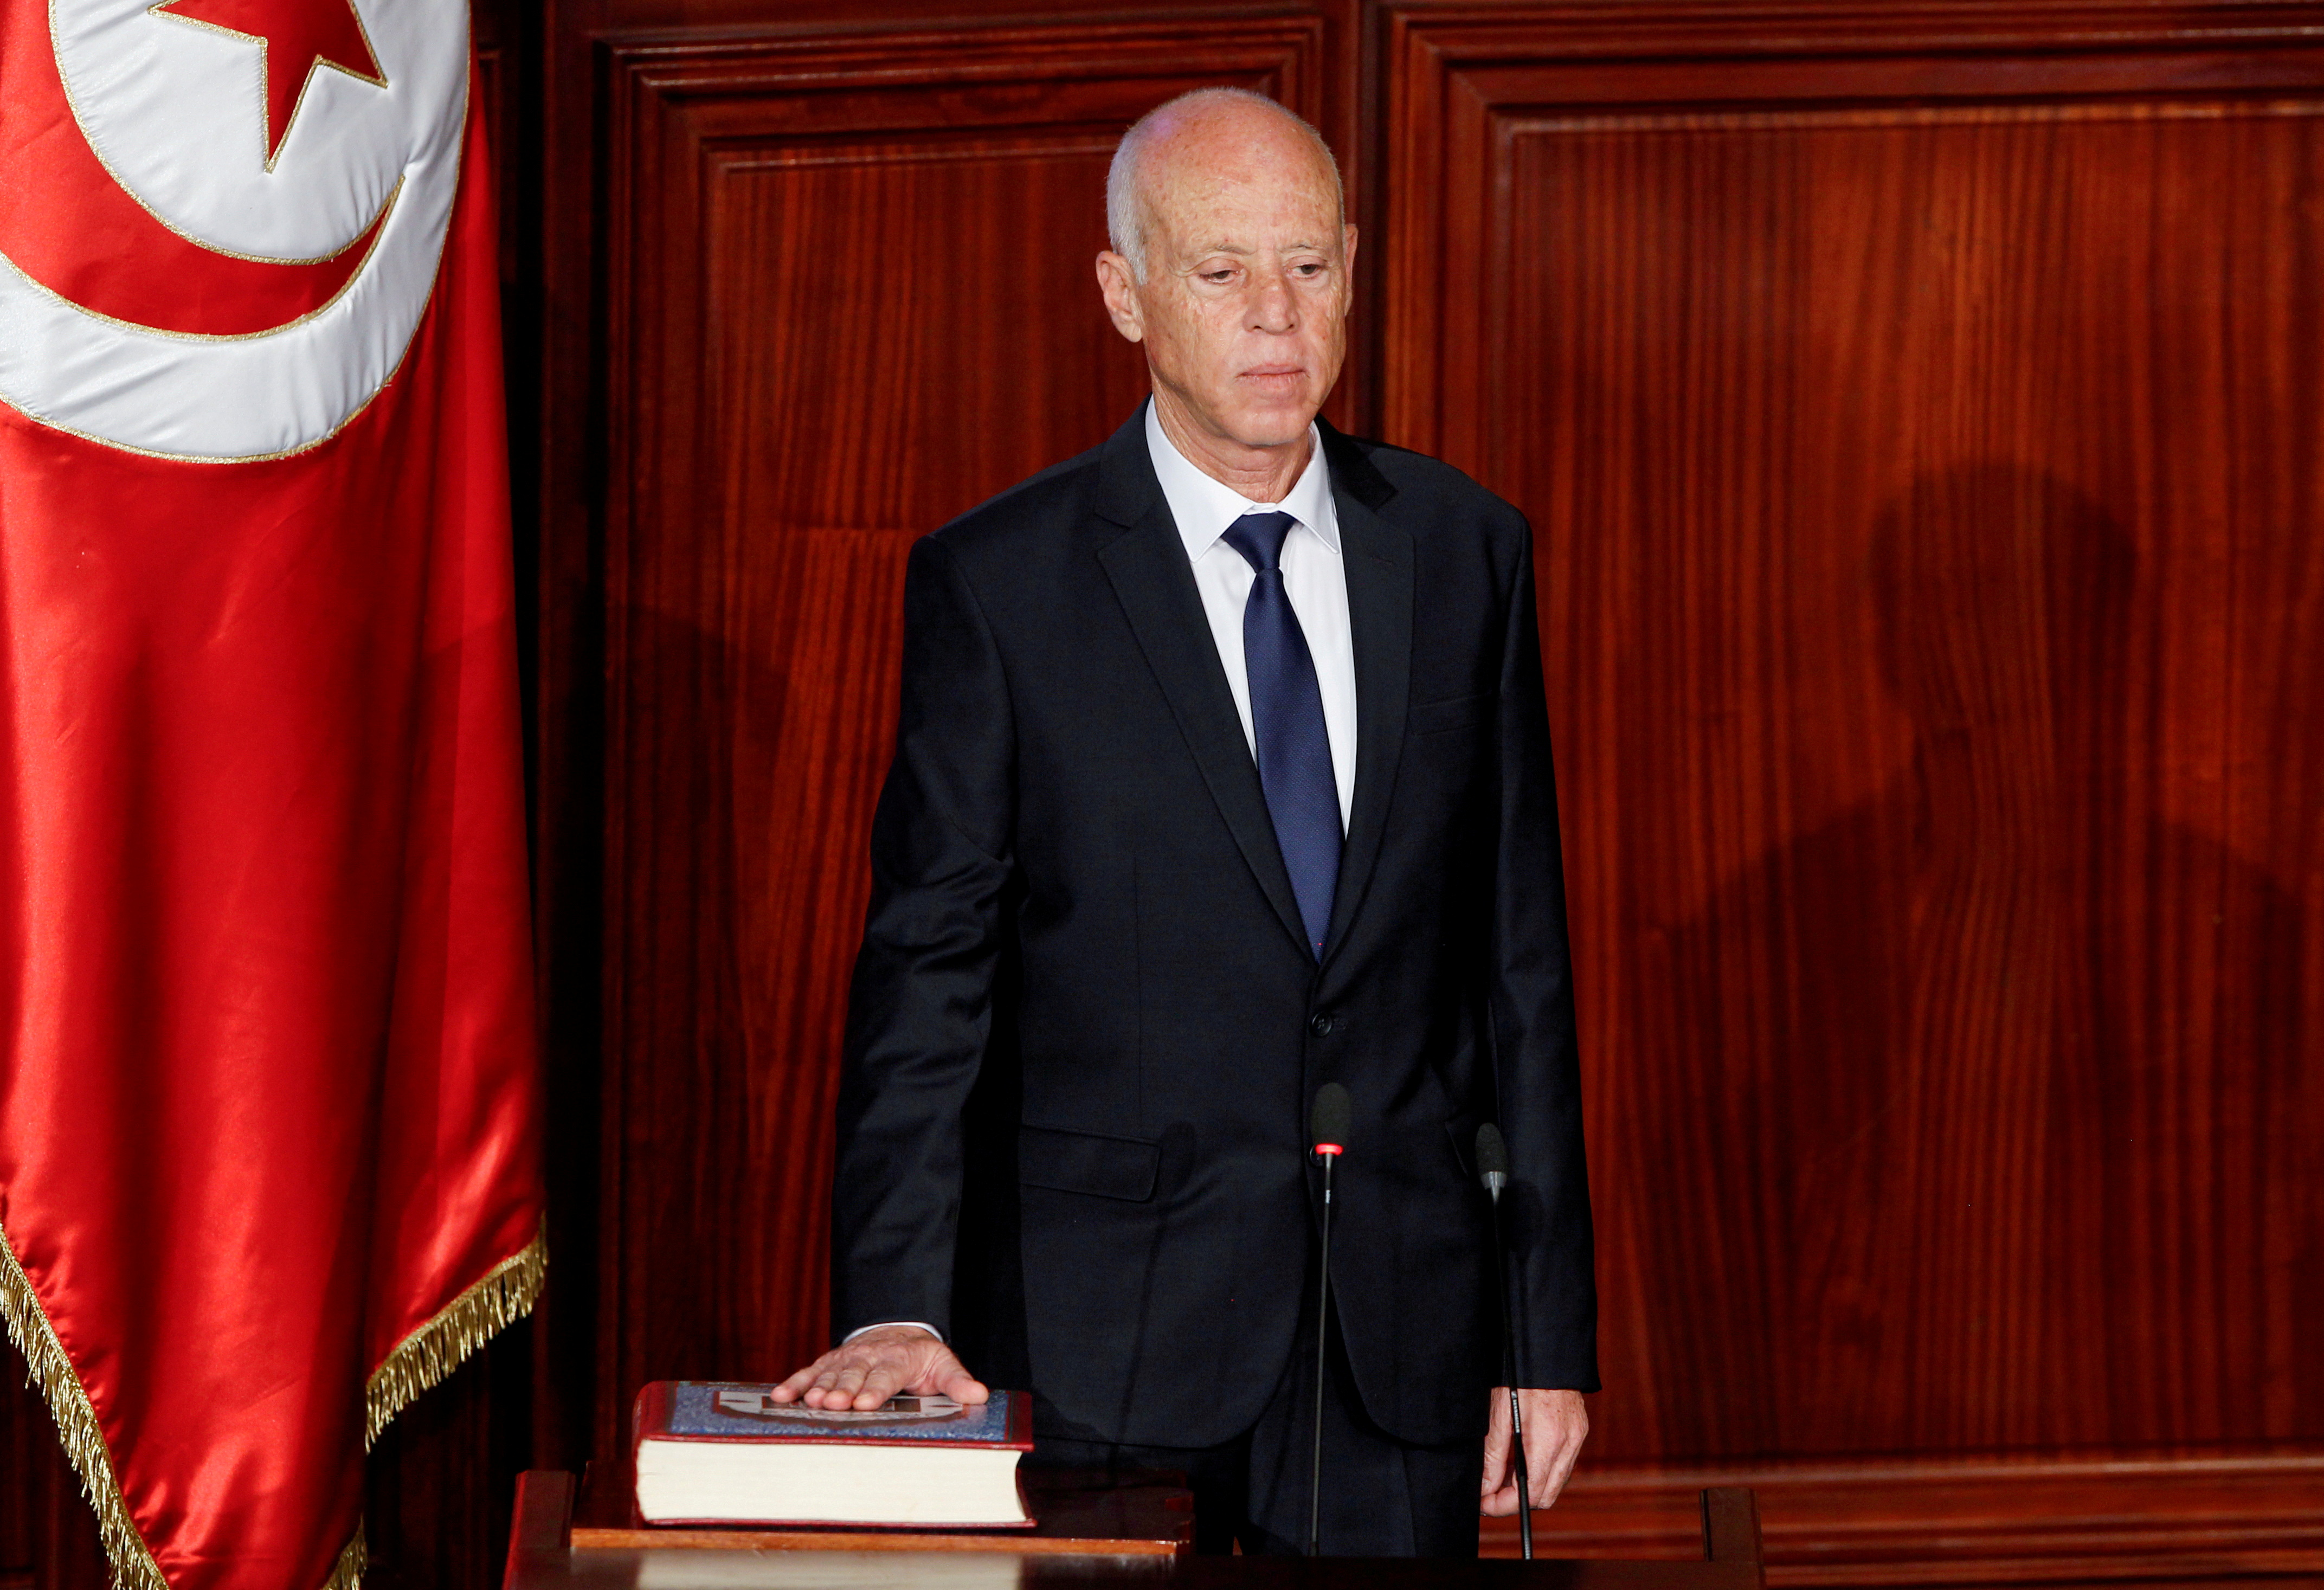 Tunisian President Kais Saied takes the oath of office in Tunis